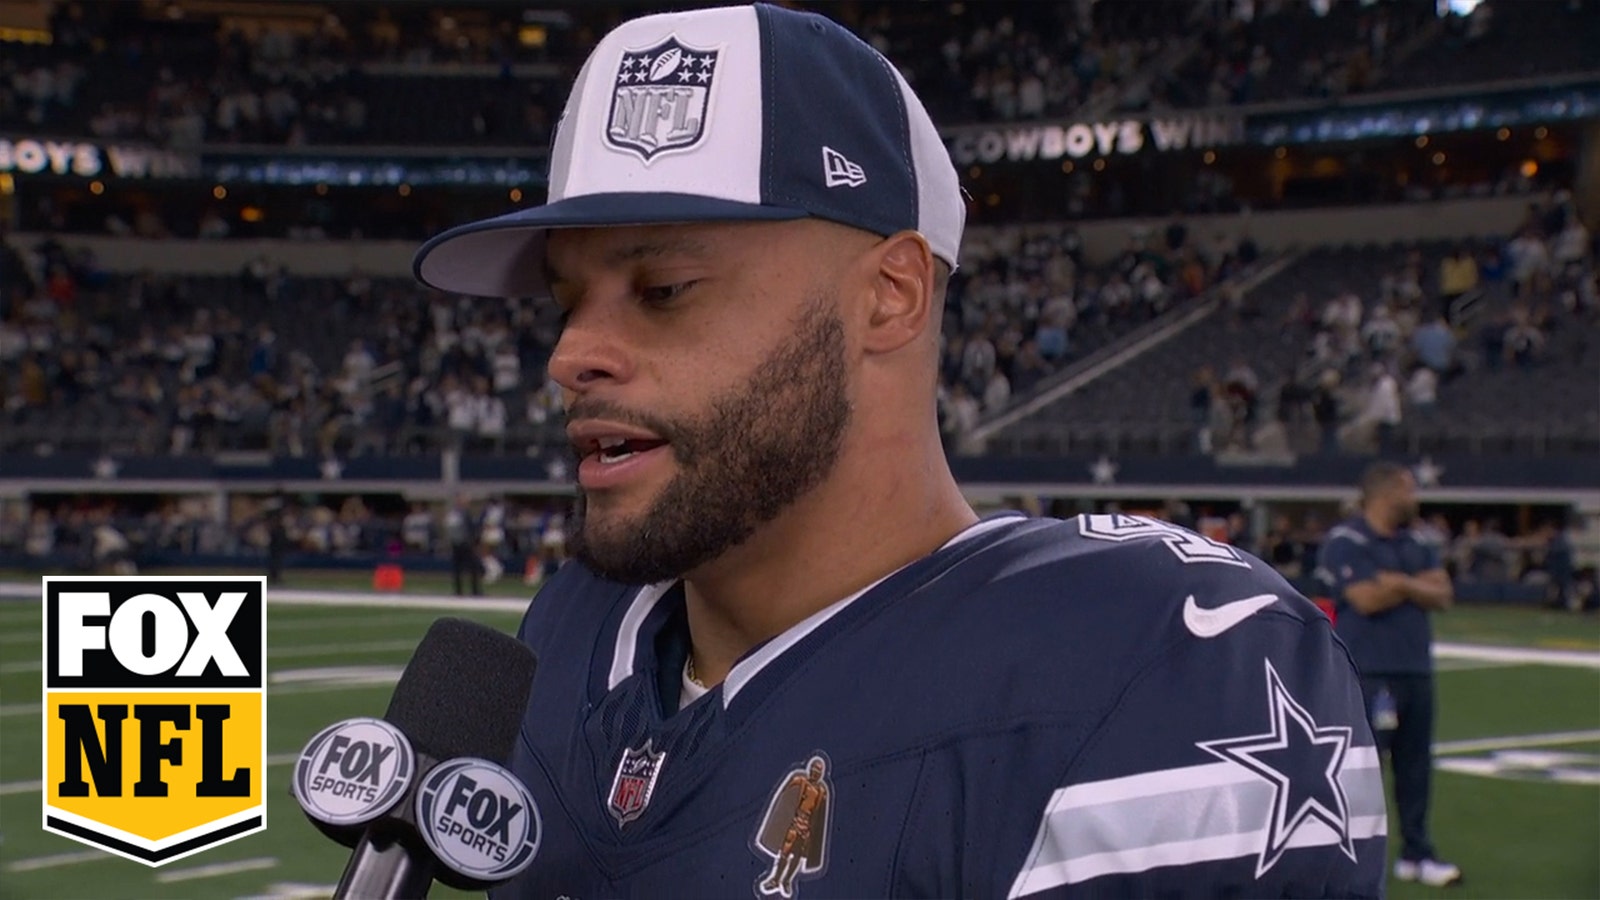 "Excited for that matchup" – Dak Prescott on the trip to Philly